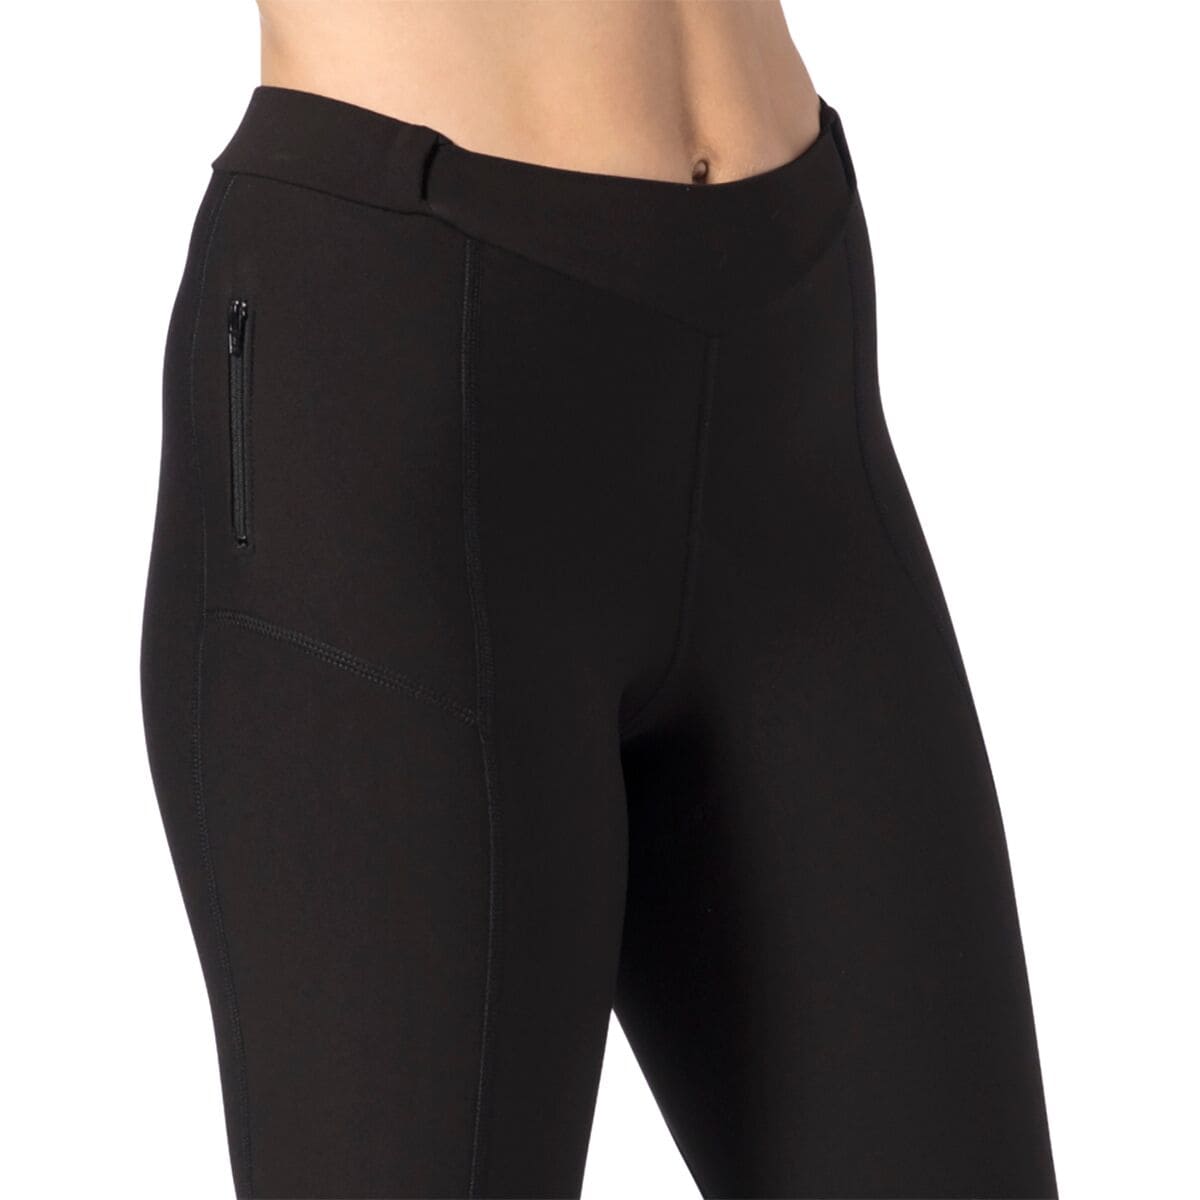 Terry Bicycles Coolweather Tight - Women's - Bike